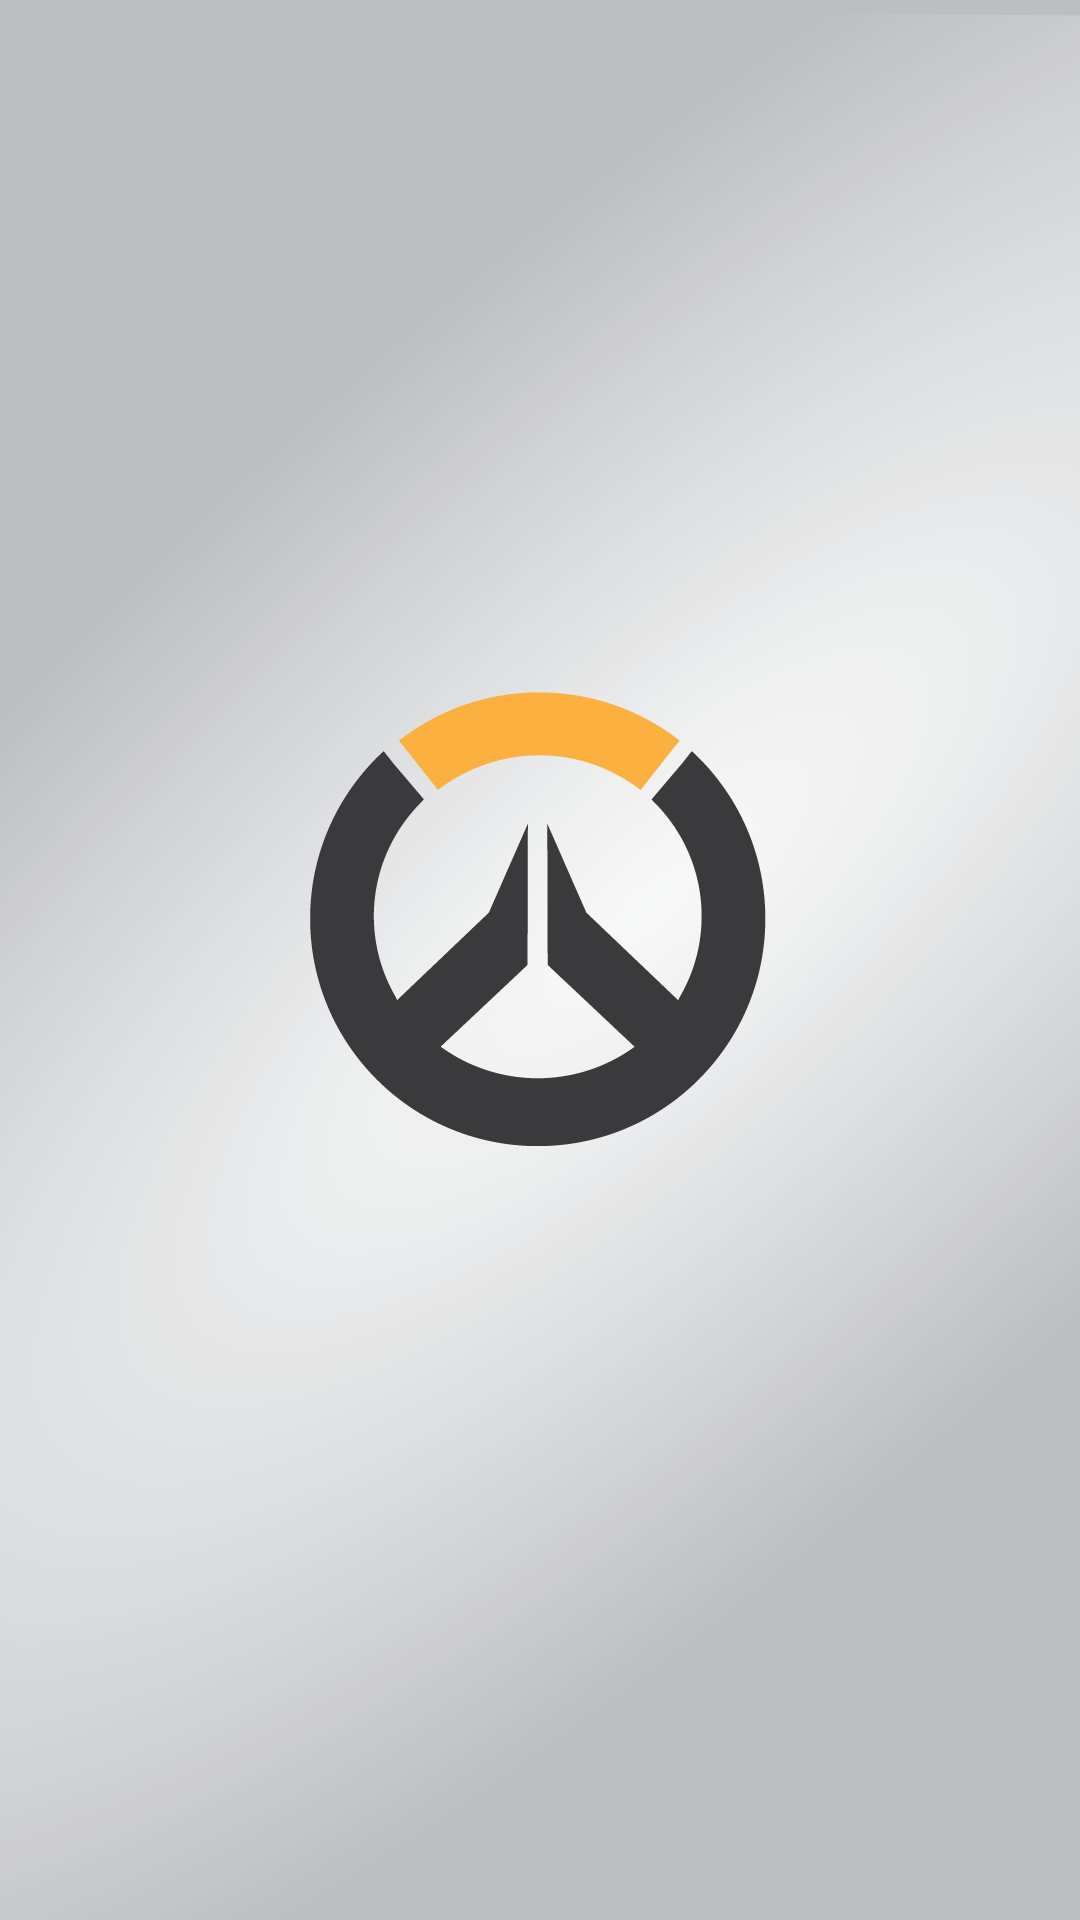 Tracer Overwatch 4K Wallpaper iPhone HD Phone #7791m